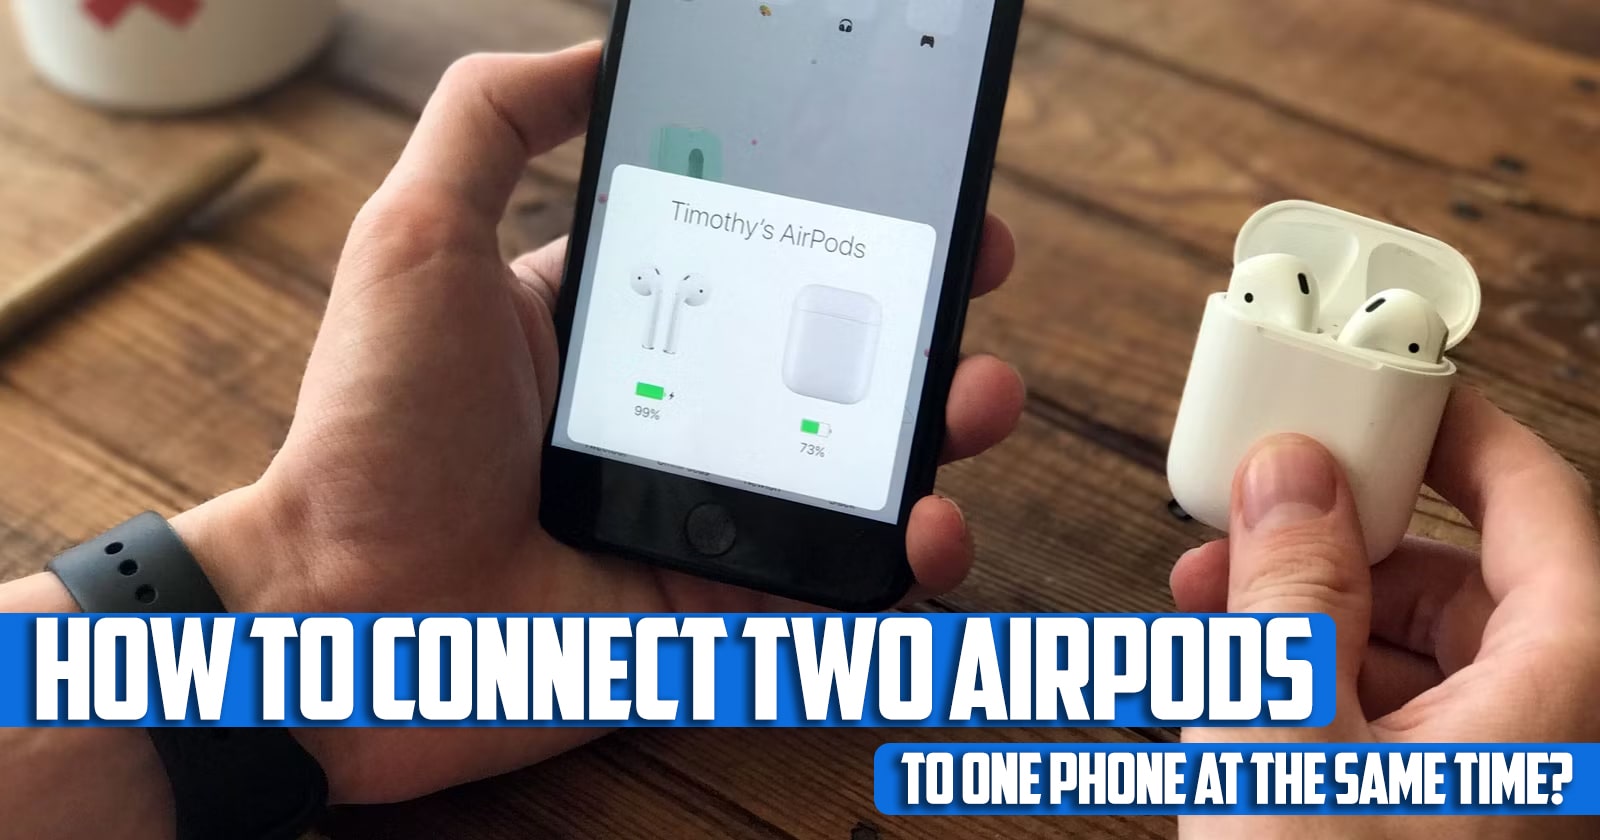 how to connect two airpods to one phone at the same time